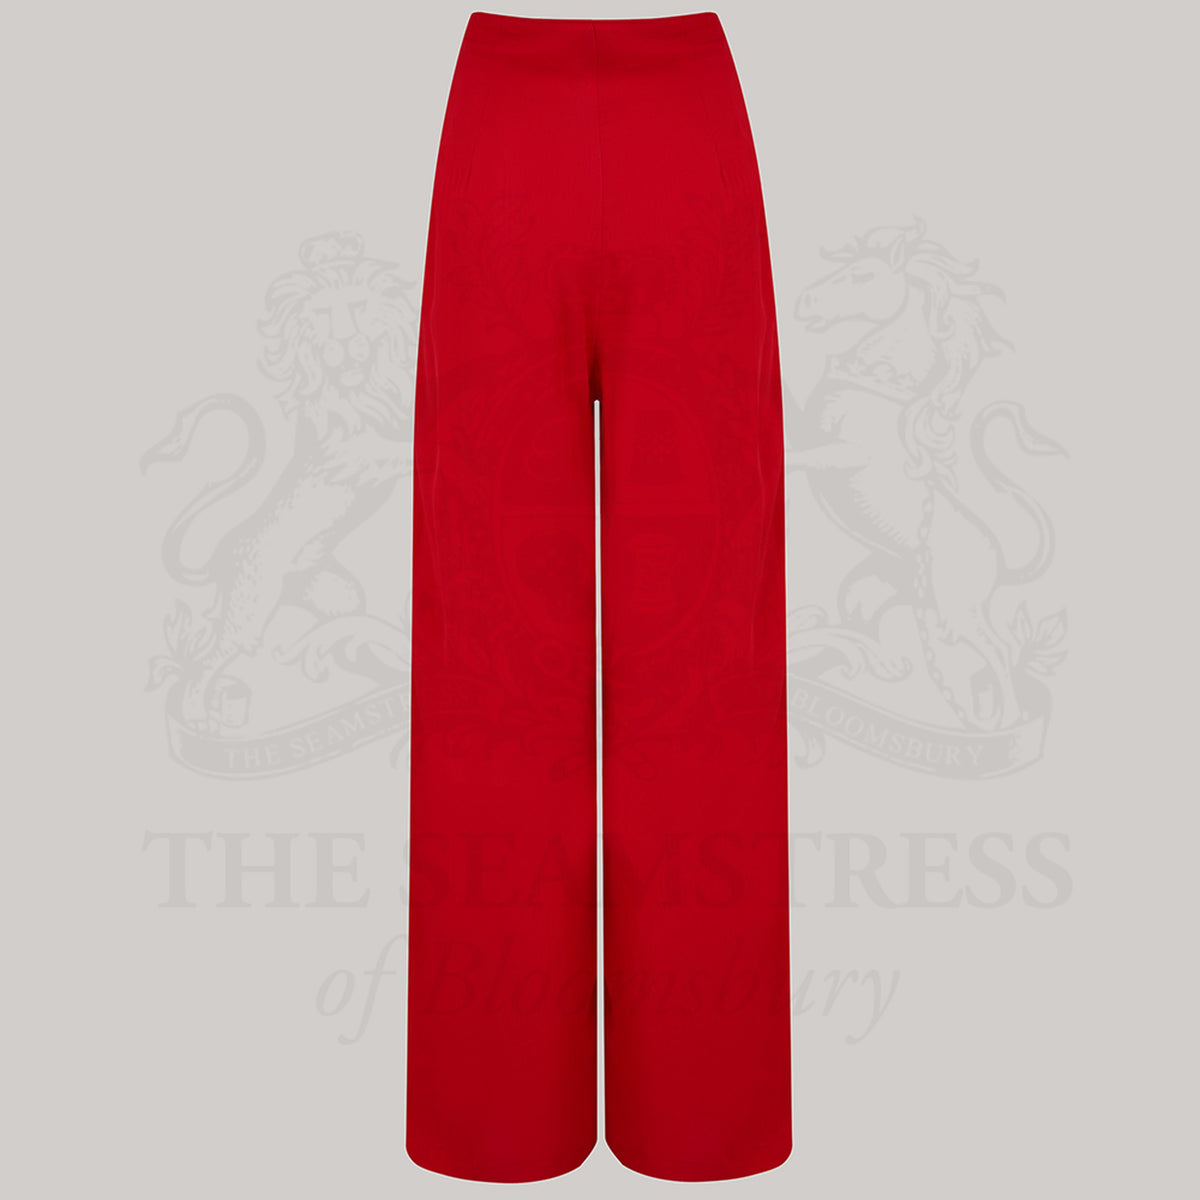 Wide-leg 1940s women’s trousers in red. Four decorative buttons are down the left from the waist with a hidden zip in the side seam. 